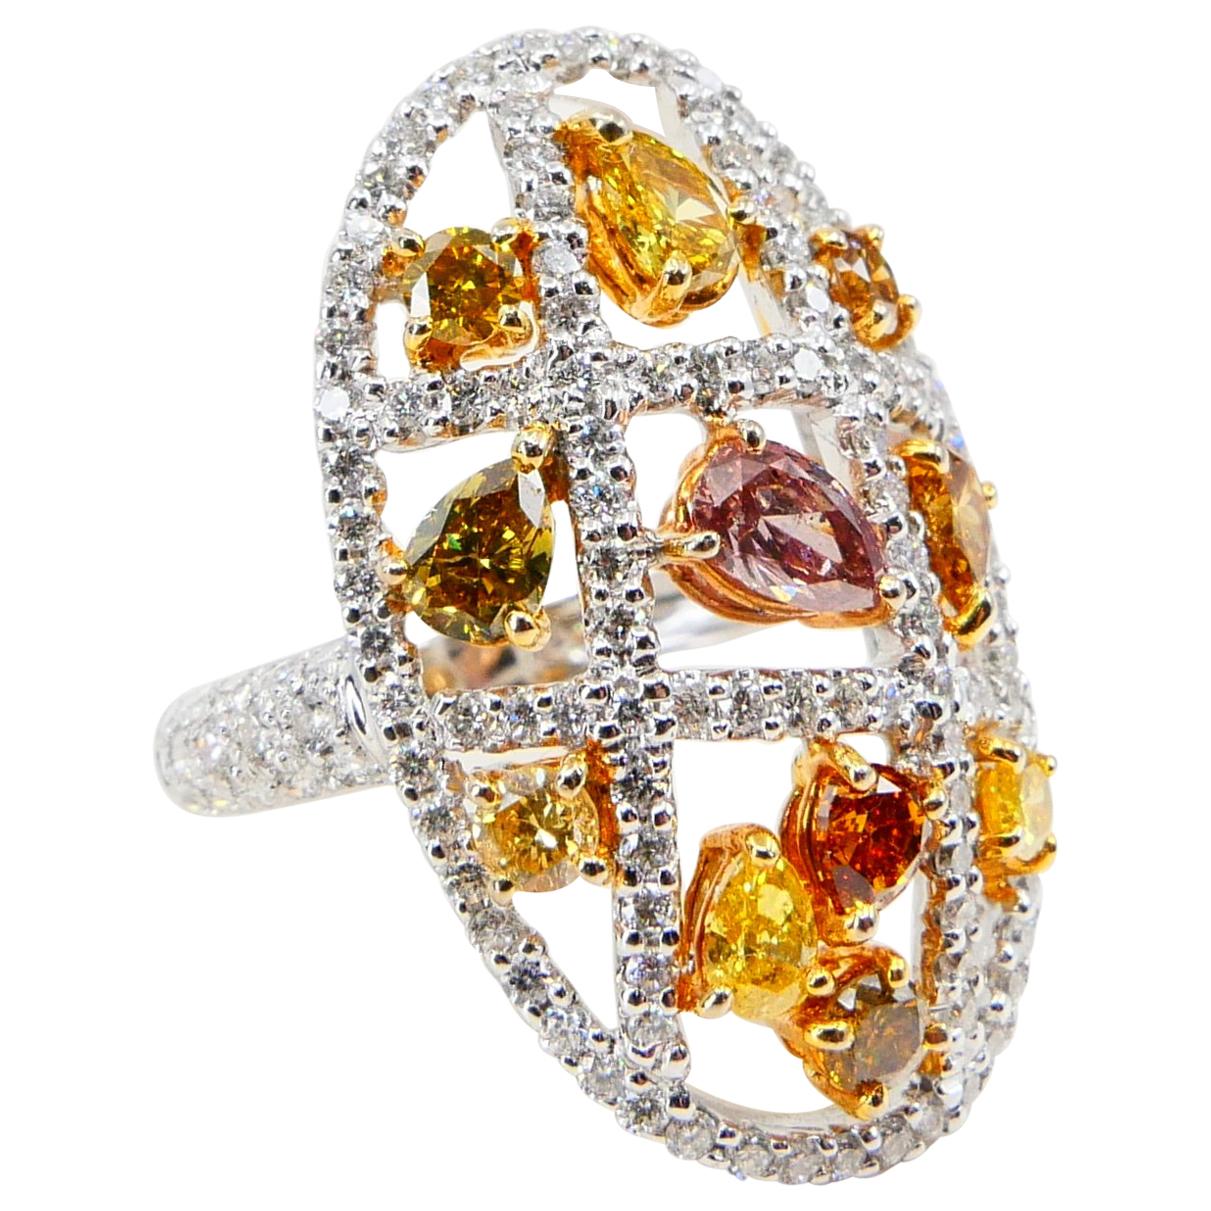 Fancy Color, Fancy Shaped Multicolored Diamond Cocktail Ring, Statement Piece